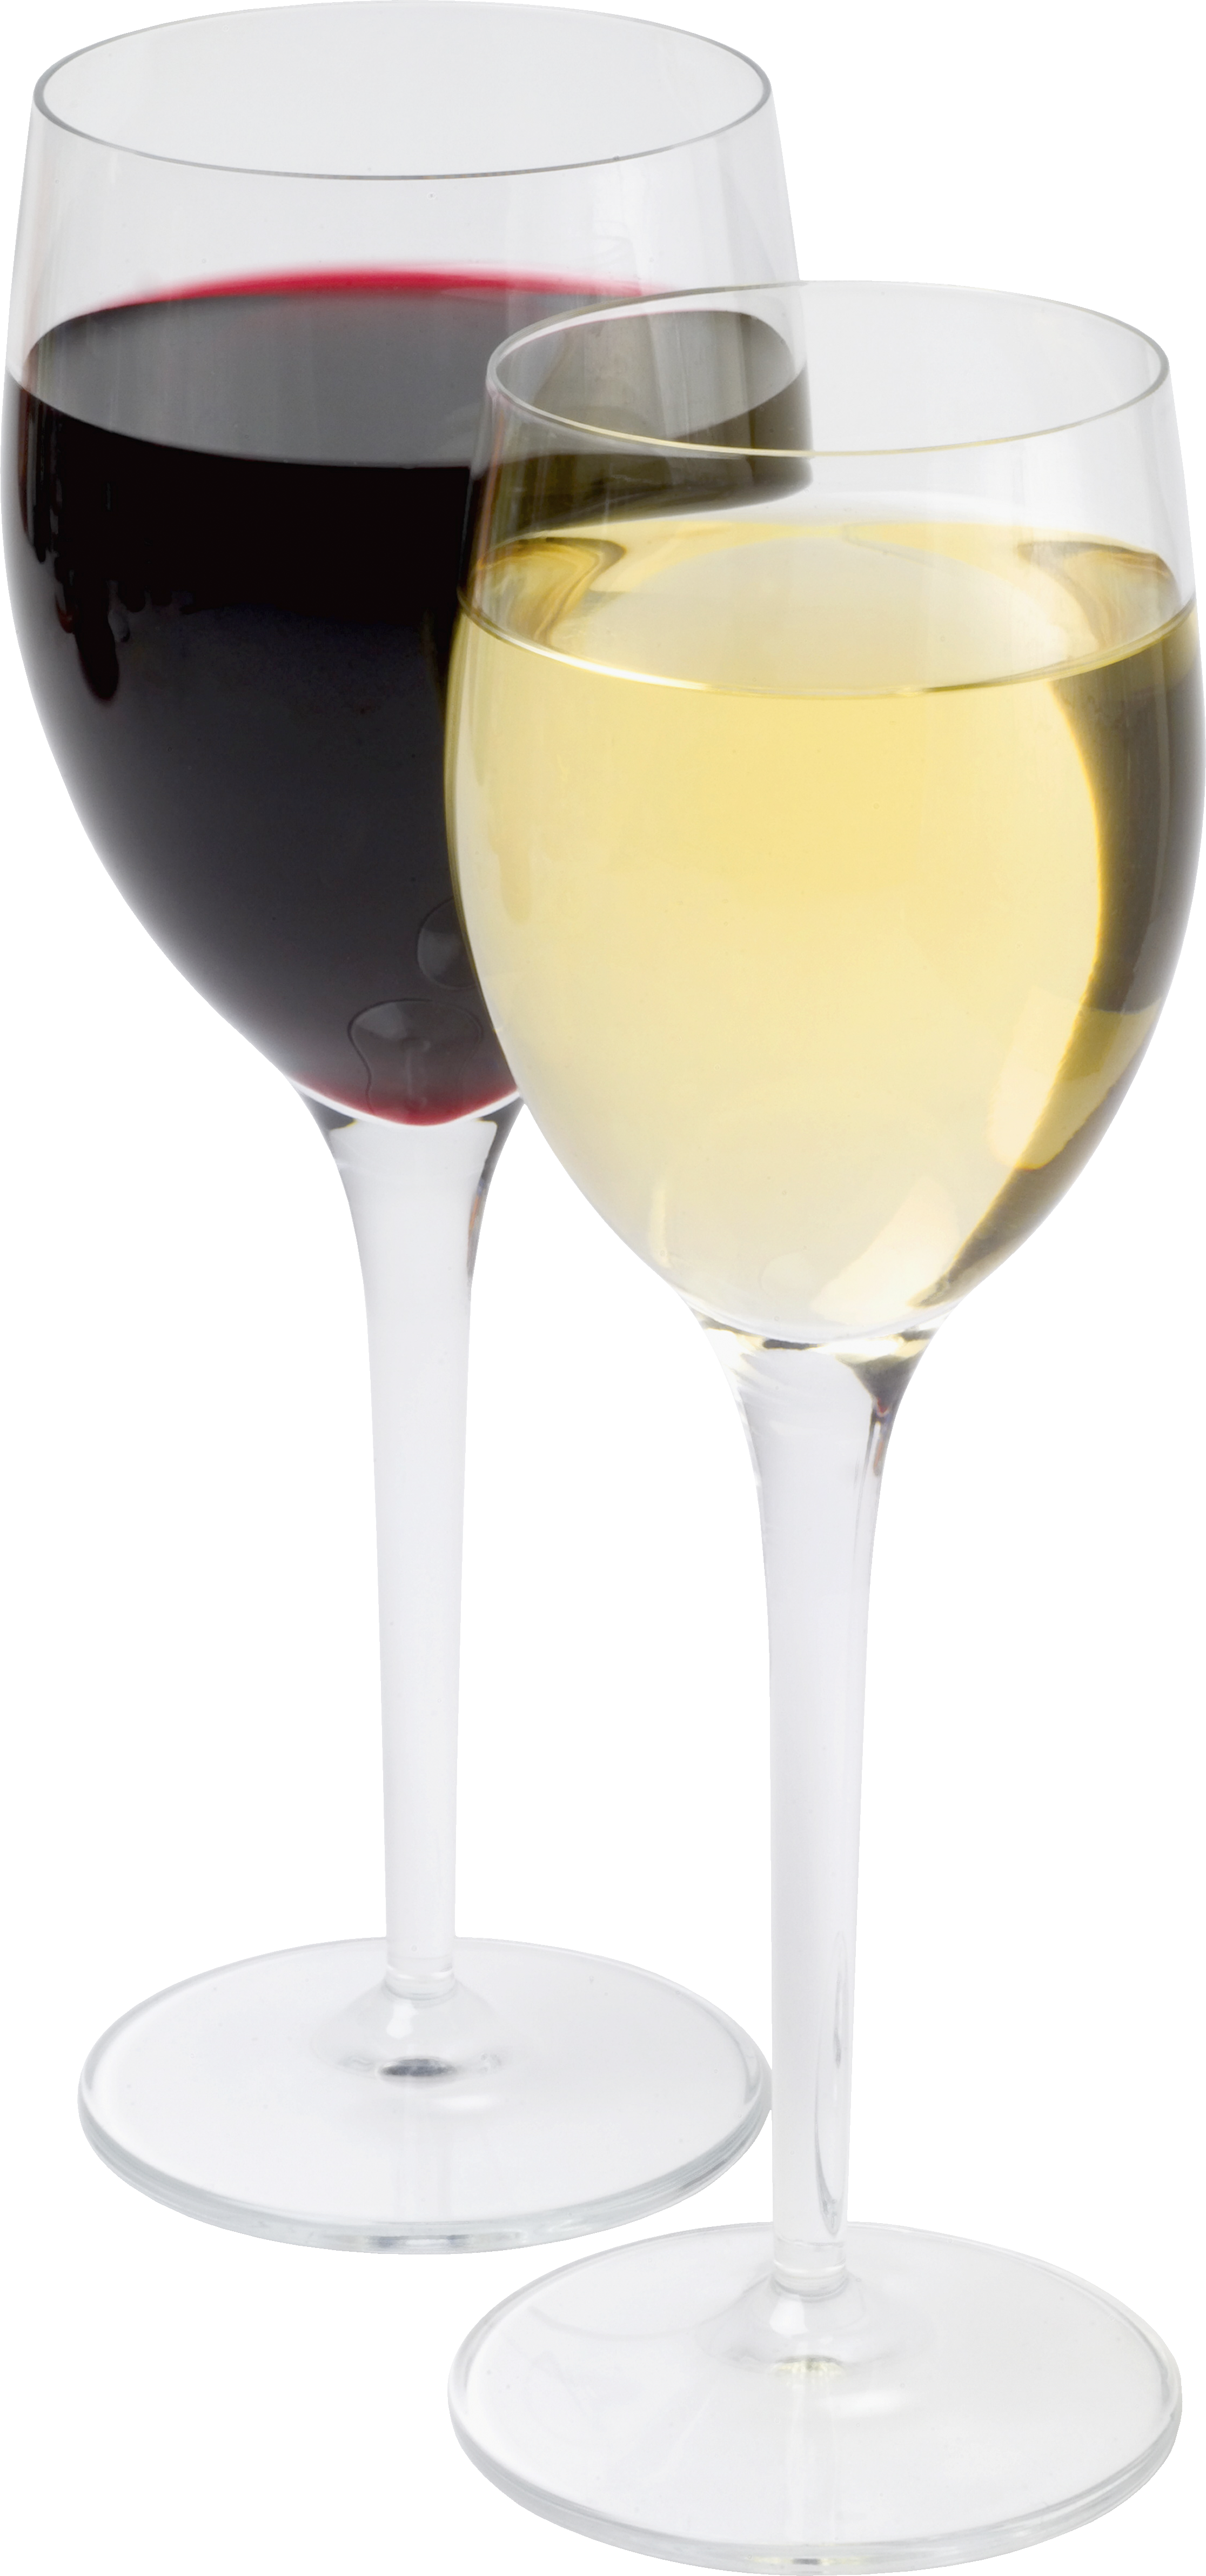 Wine glass no background clipart 